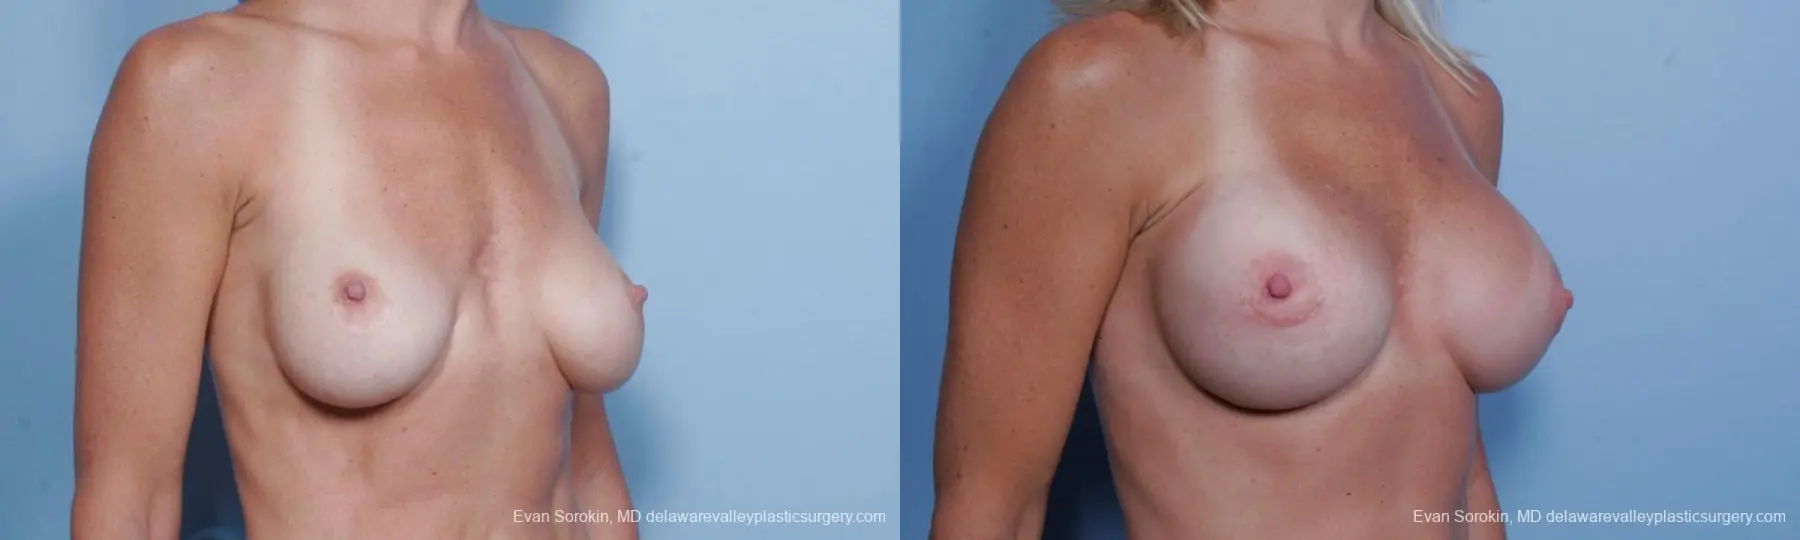 Philadelphia Breast Augmentation 9454 - Before and After 2